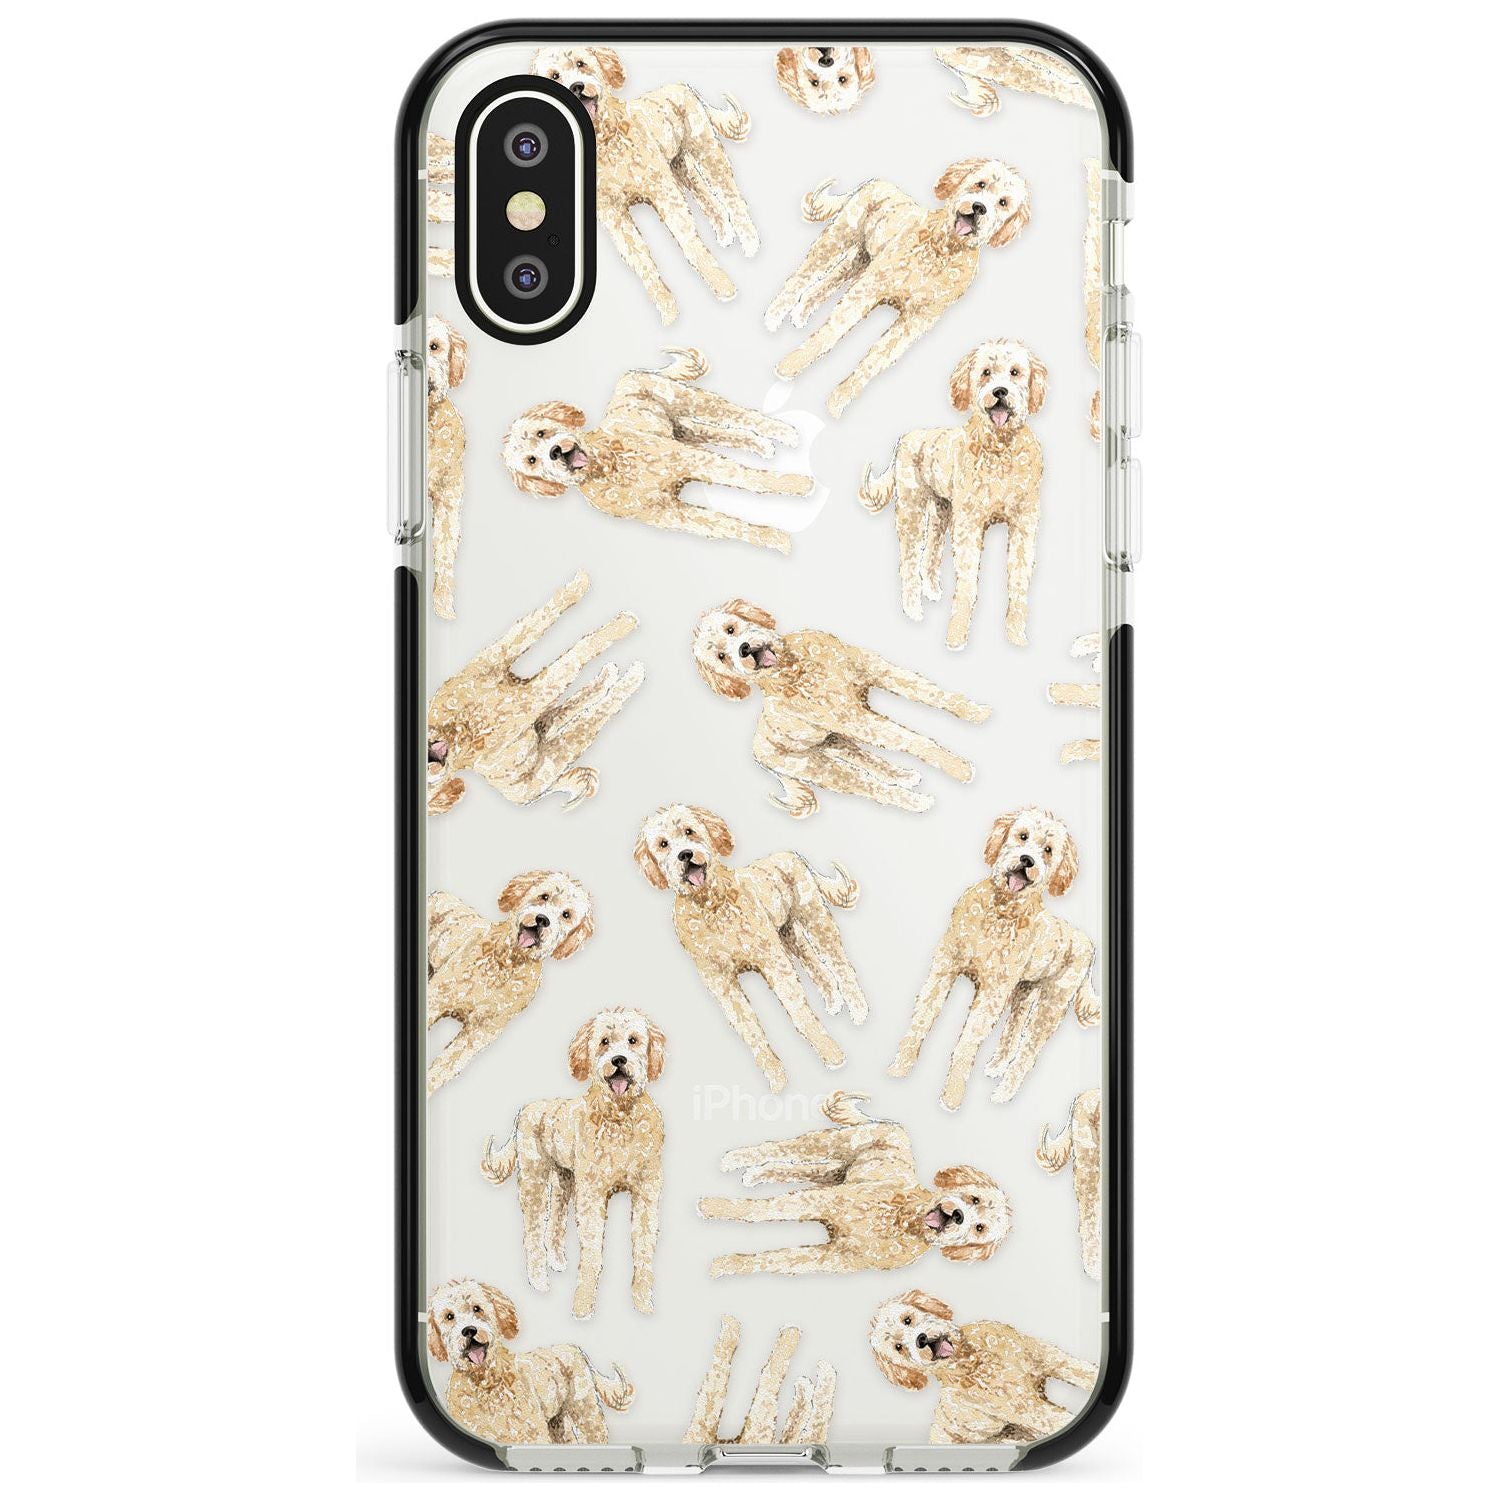 Goldendoodle Watercolour Dog Pattern Black Impact Phone Case for iPhone X XS Max XR